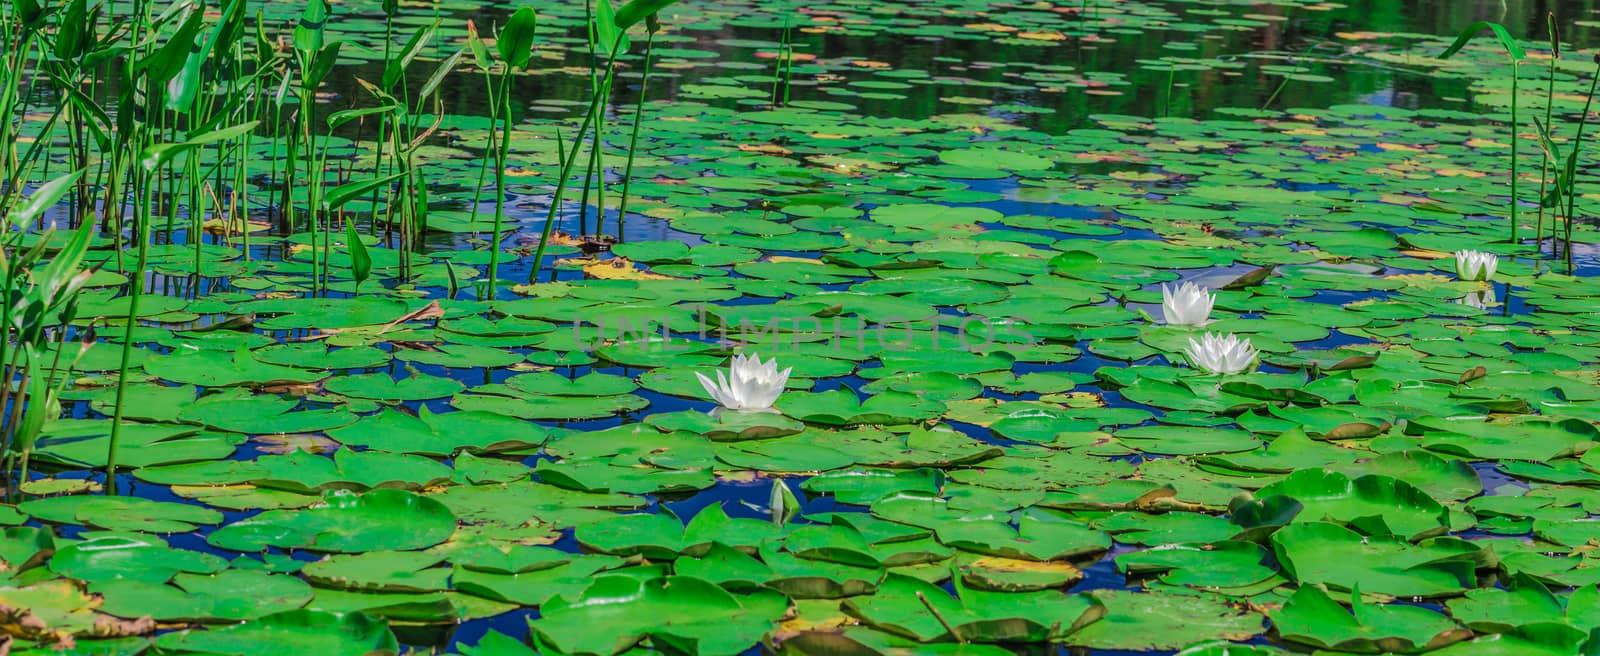 A lot of lily pads on a lake by petkolophoto